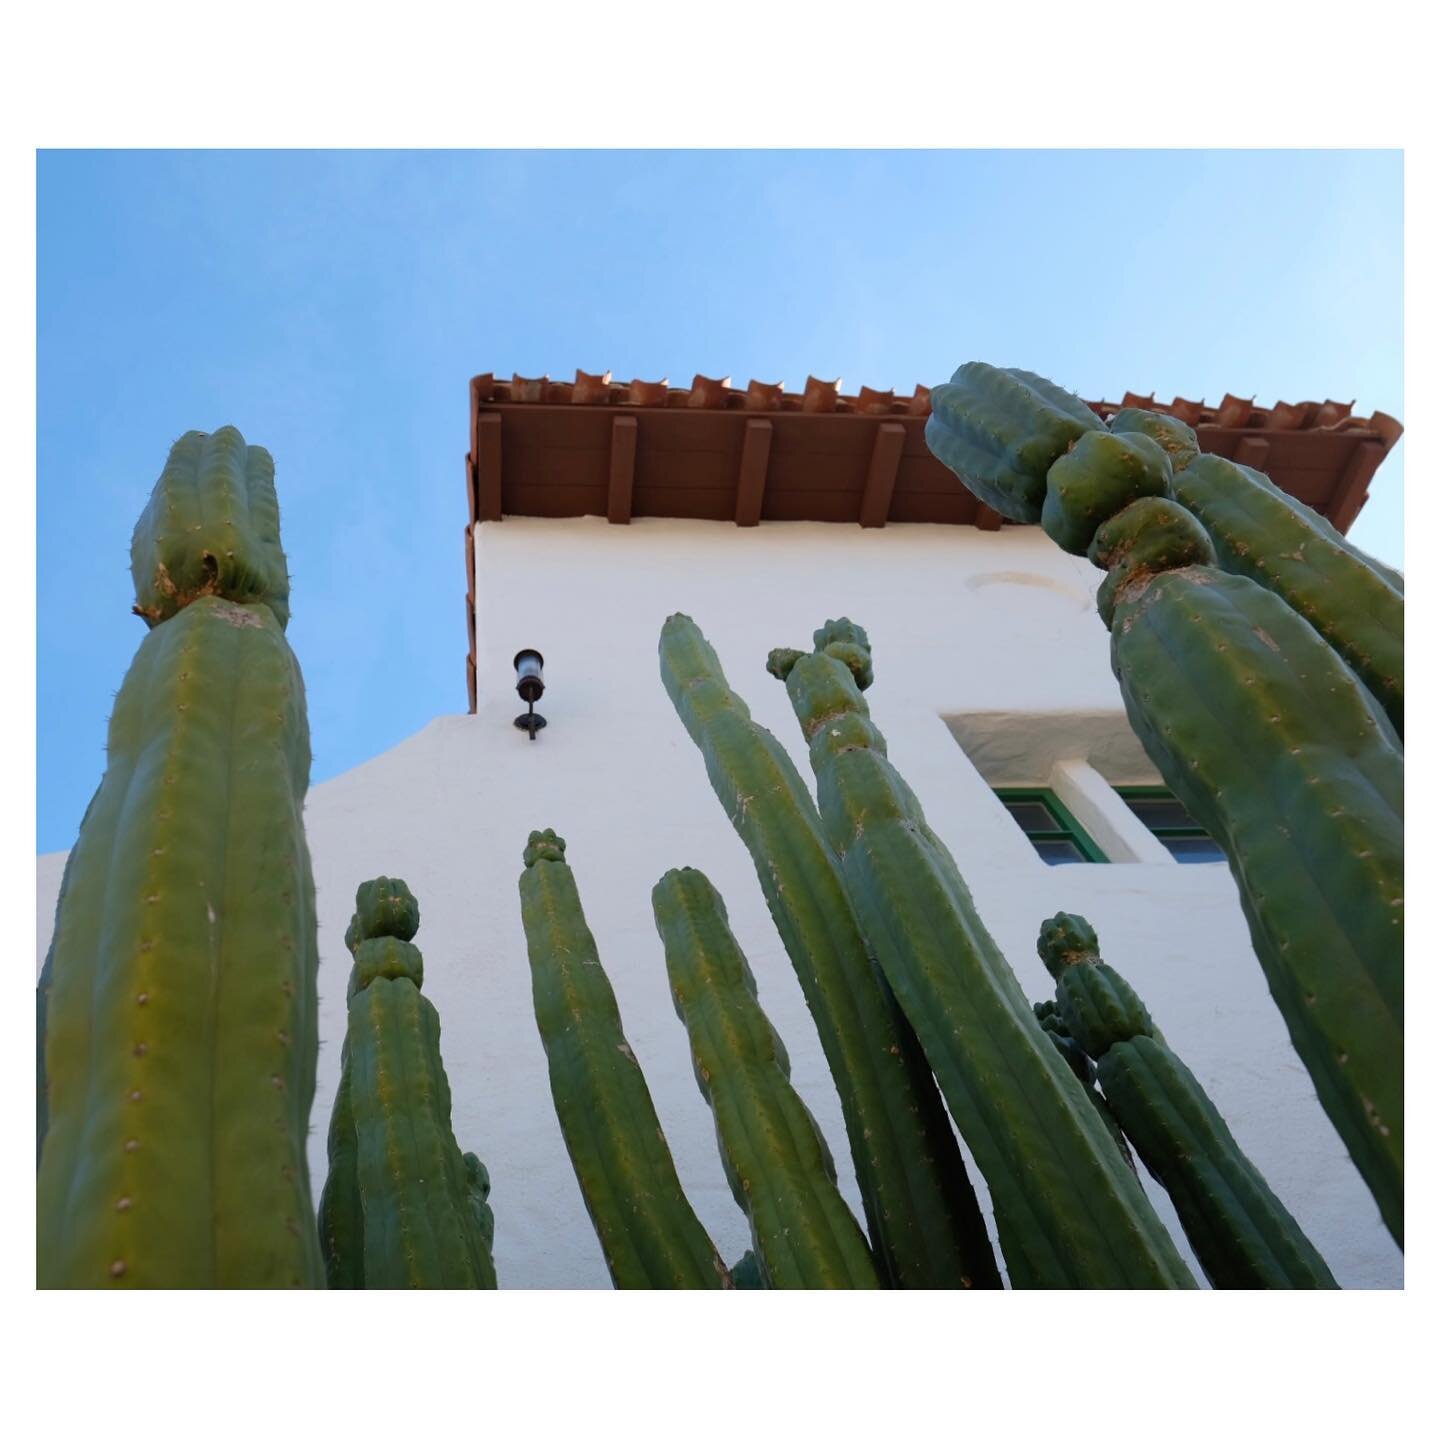 &ldquo;Let your bright eyes be held by the sun &ndash; you&rsquo;ll see the very best light, in everyone.&rdquo;⁣
⁣
&mdash; tess guinery ⁣
⁣⁣⁣⁣⁣⁣⁣⁣⁣⁣⁣⁣
#MilagroMonday #inspiration #ilovemexico #lookup #positivevibes #cacti #cactuslover